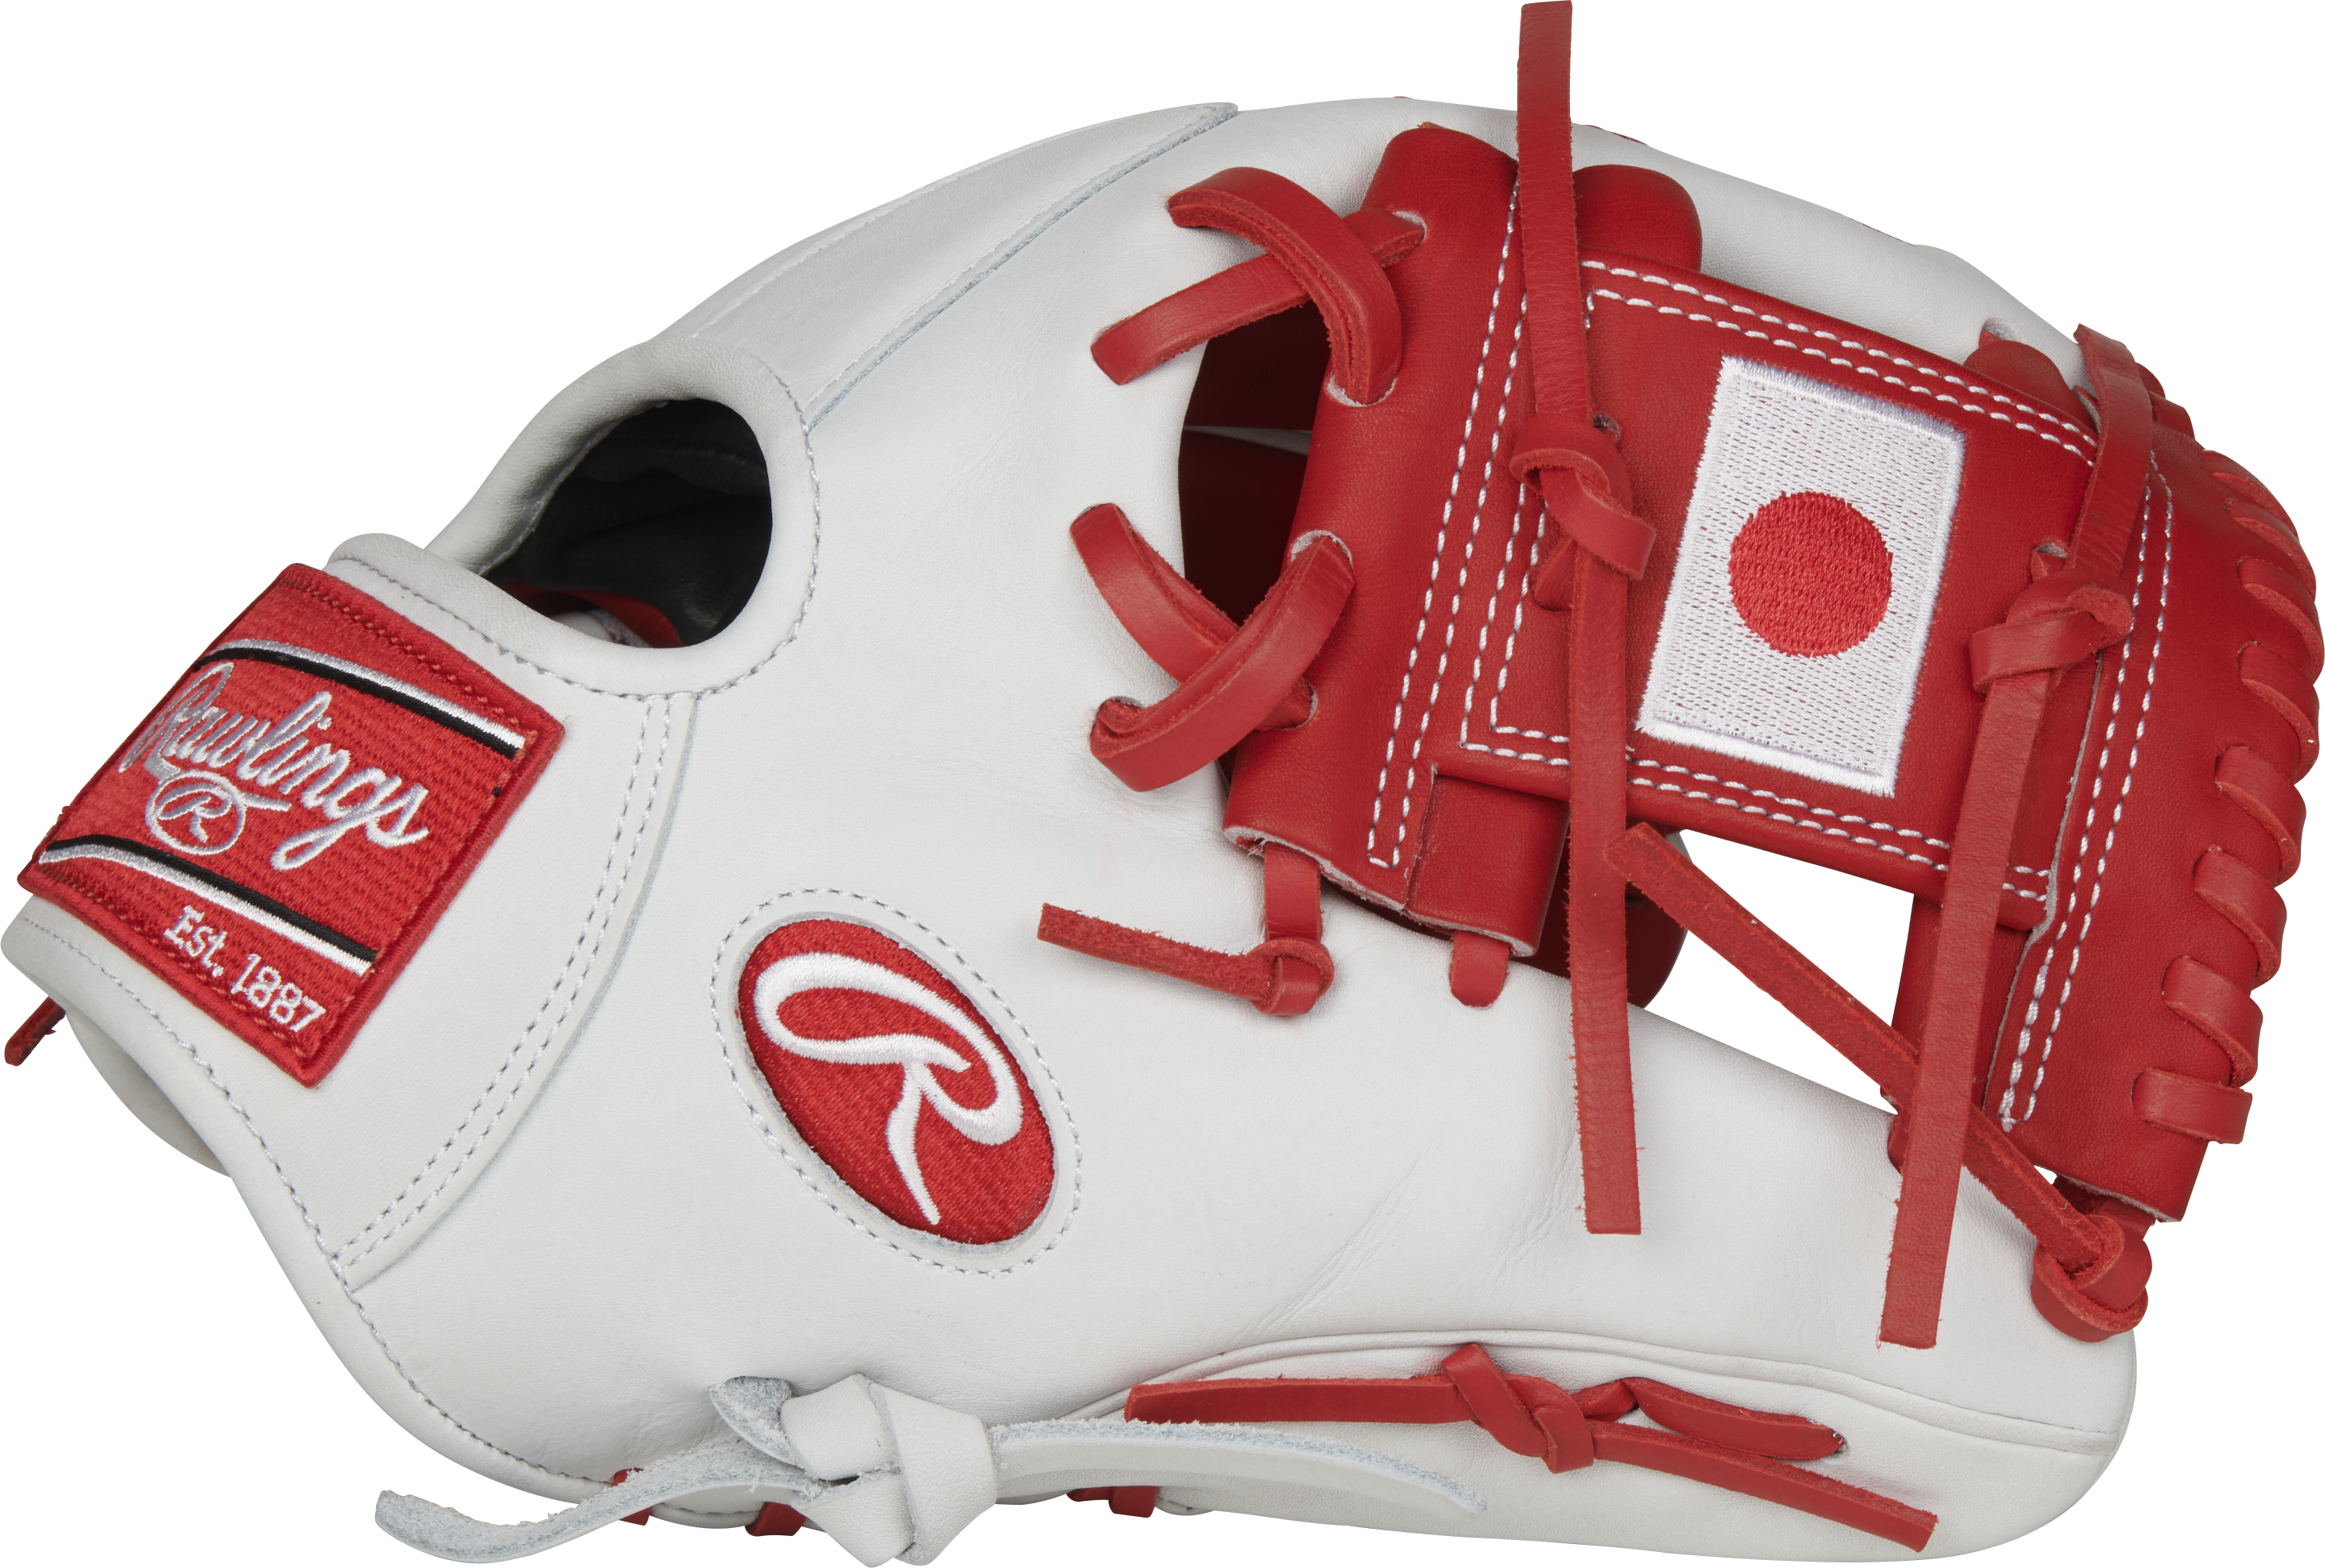 Rawlings Heart of the Hide Japan Infield Glove | Special Edition | Midway Sports.